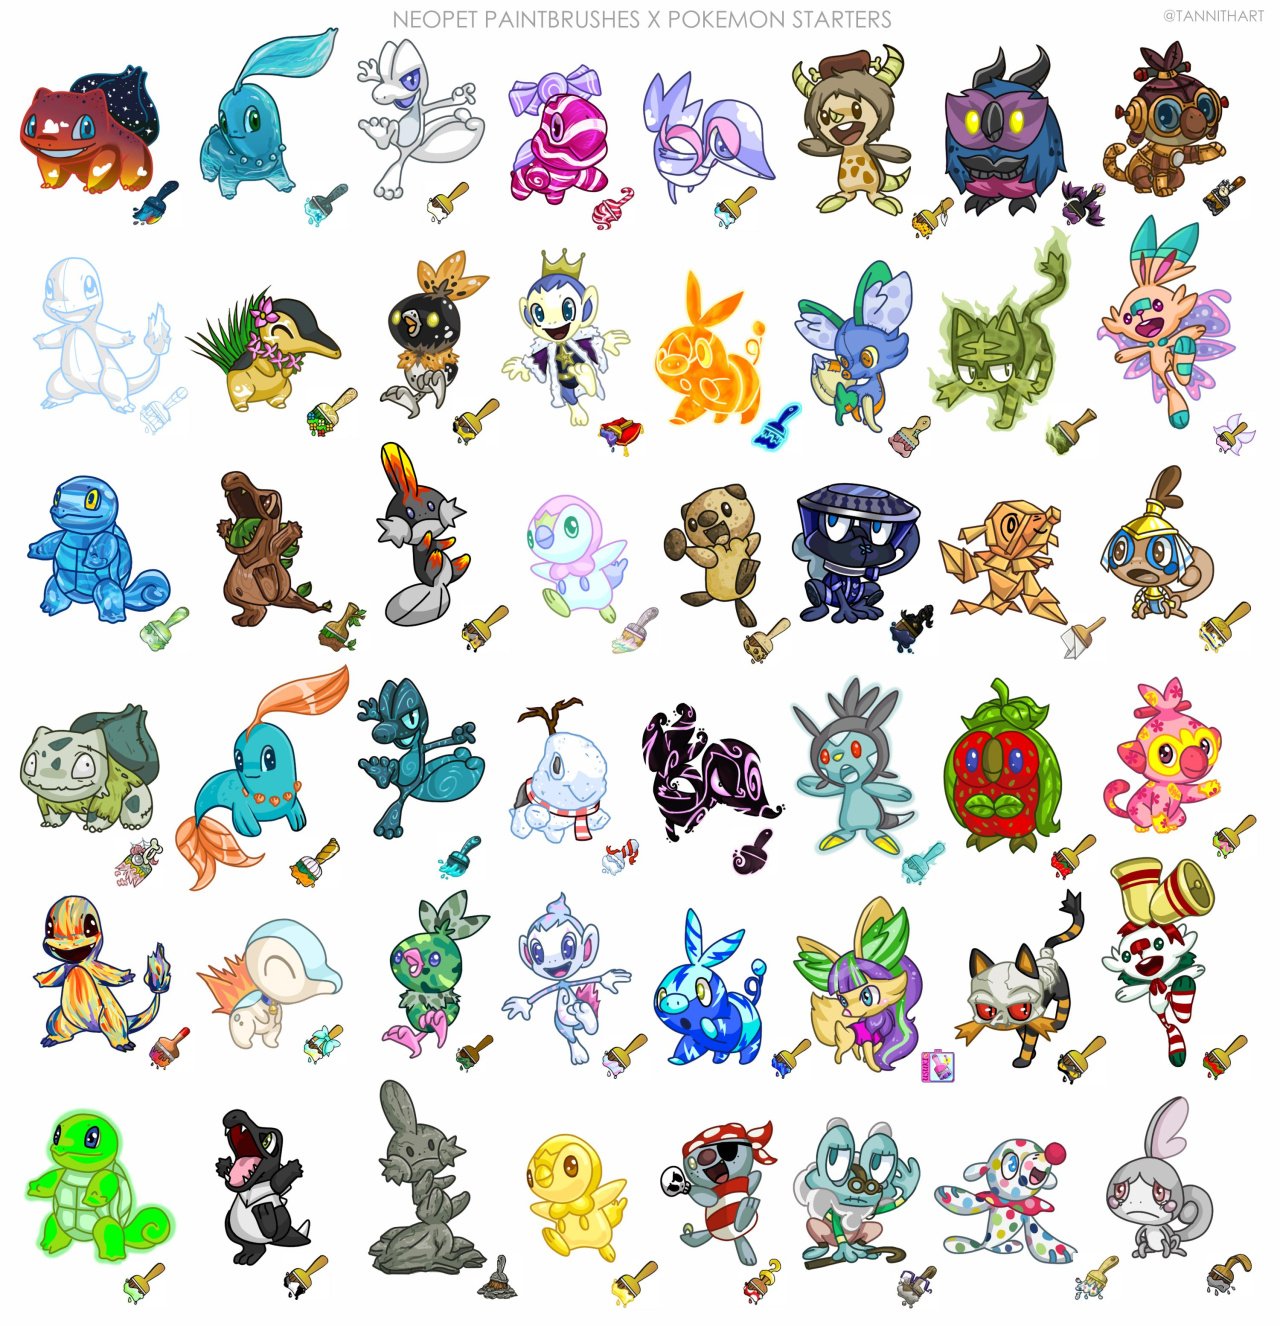 Random Neopets Or Pokémon? Why Choose, When You Can Have Both